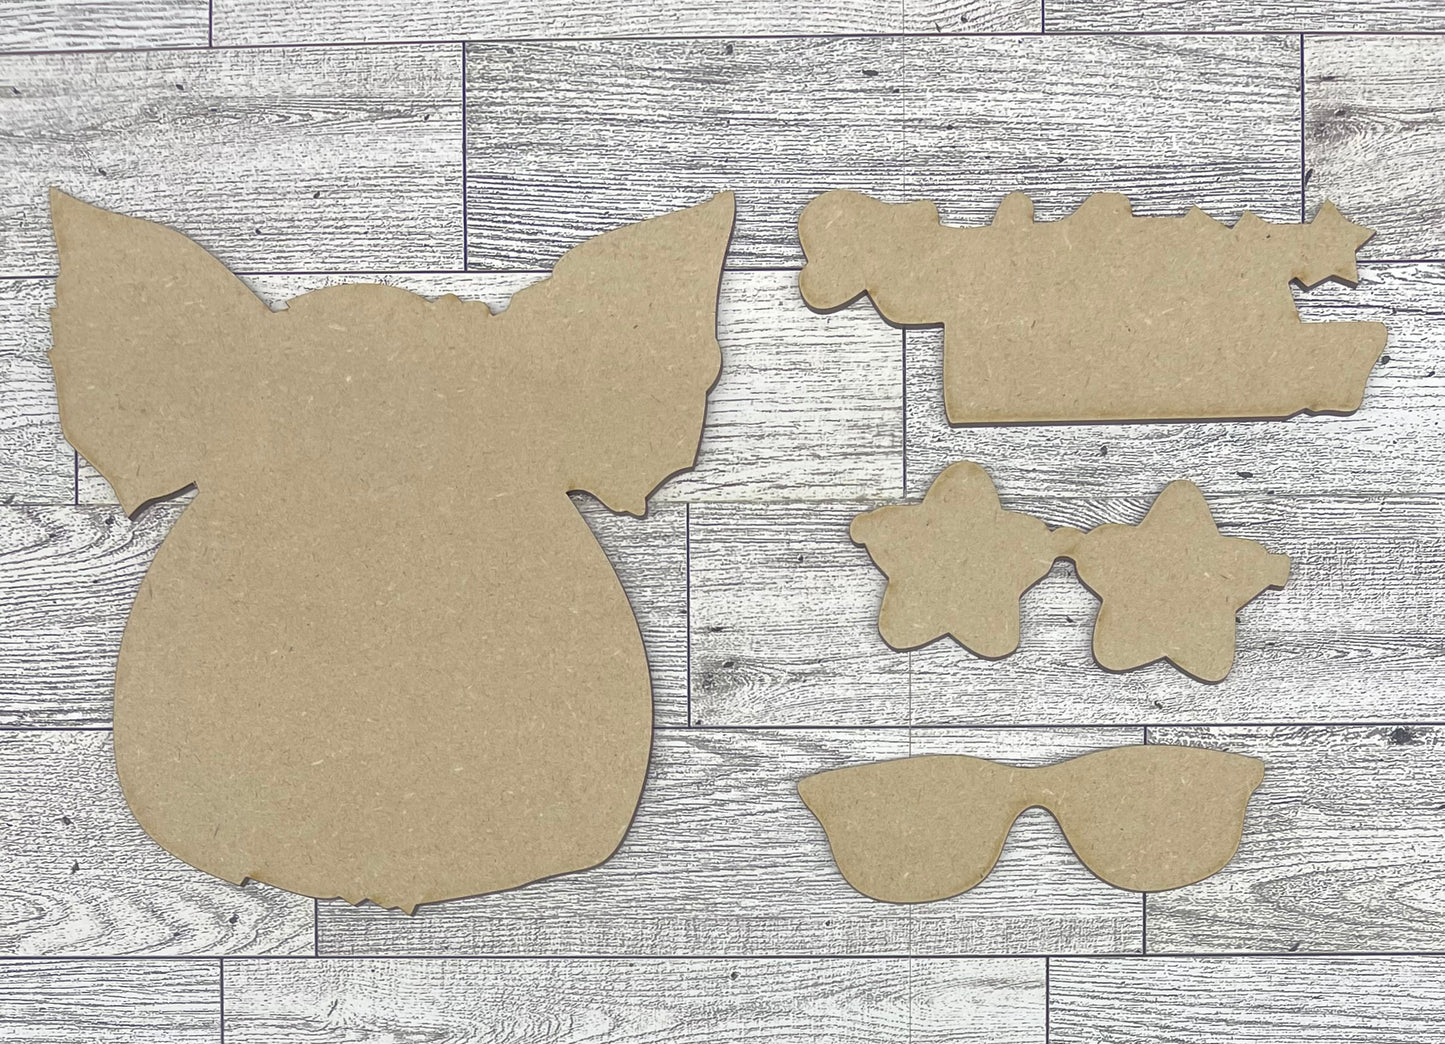 It’s kind of a pig deal - Unfinished wooden pig cutout pieces